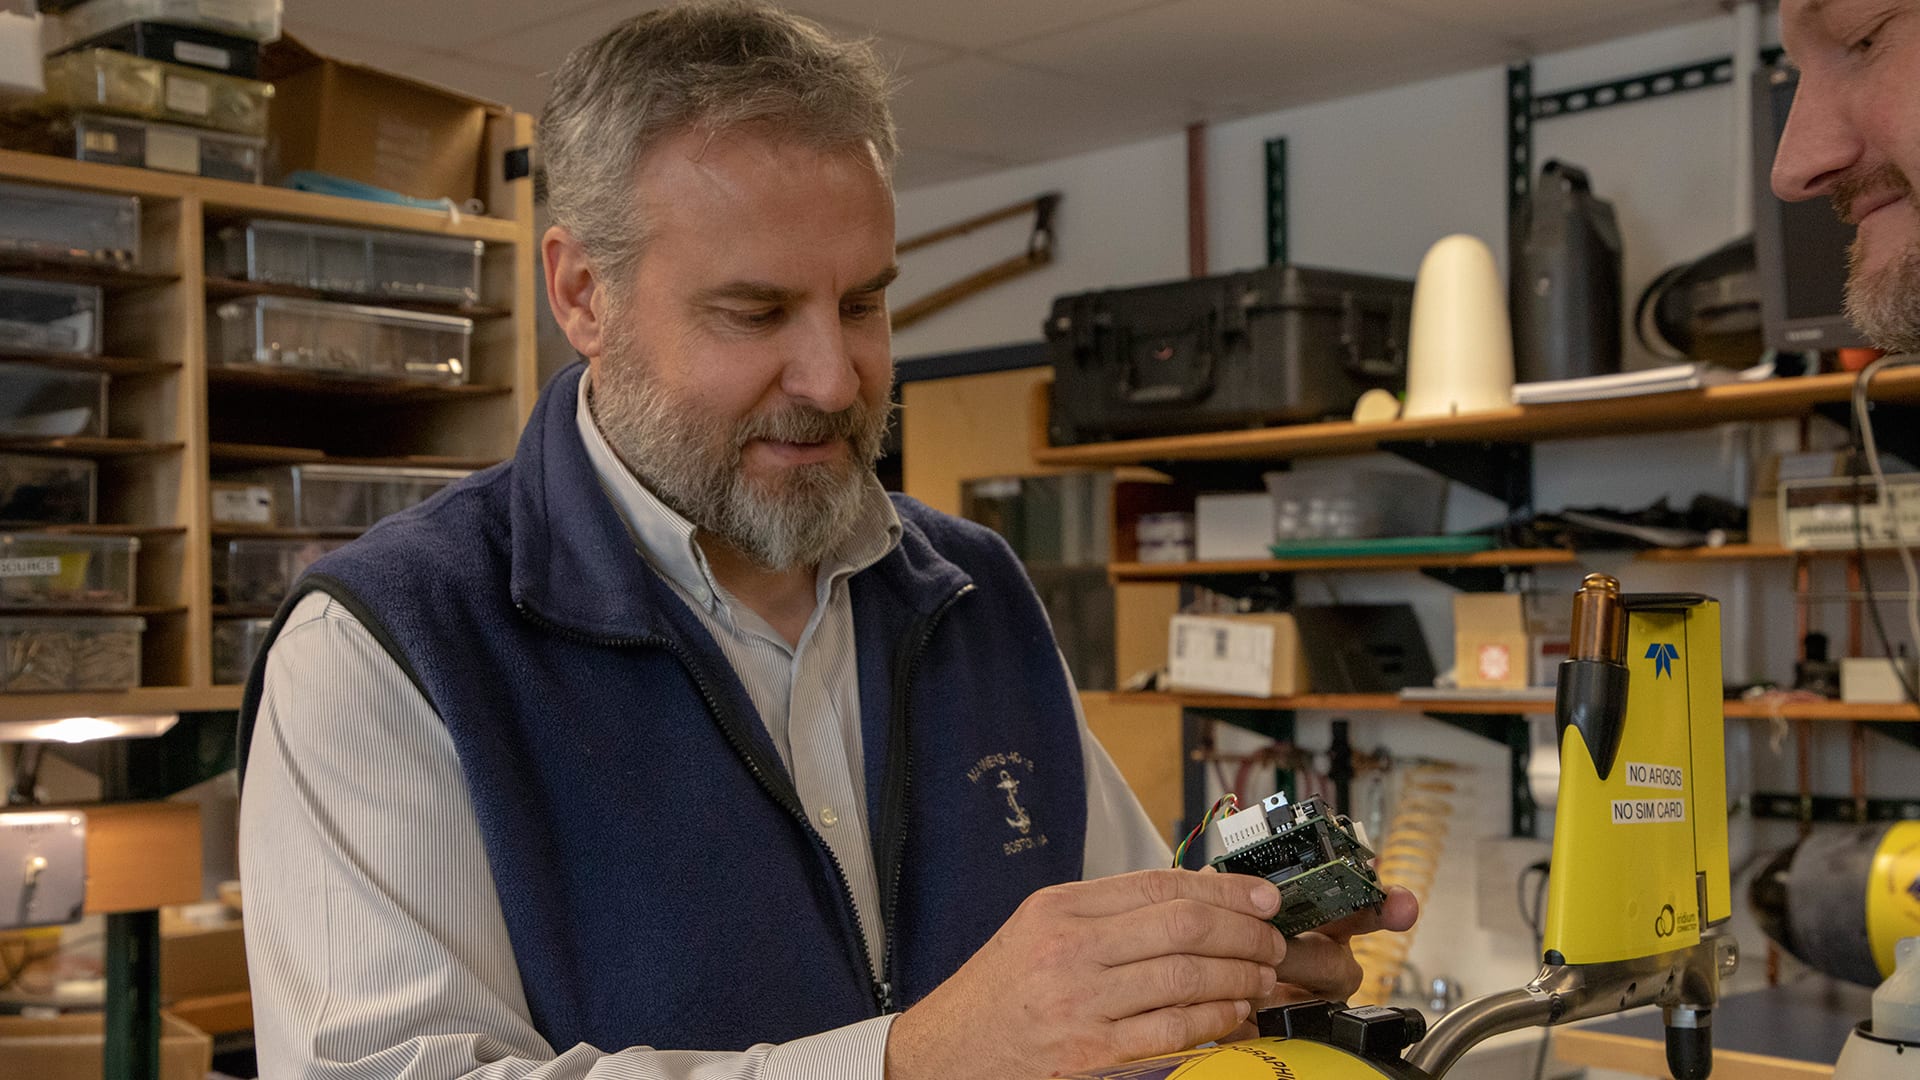 WHOI scientist Rich Camilli holds the “brains” of the under-ice glider—a low-power microcomputer which provides enough processing power to interpret the glider’s sensor data onboard and run adaptive mission plans that help it safely navigate its environment.